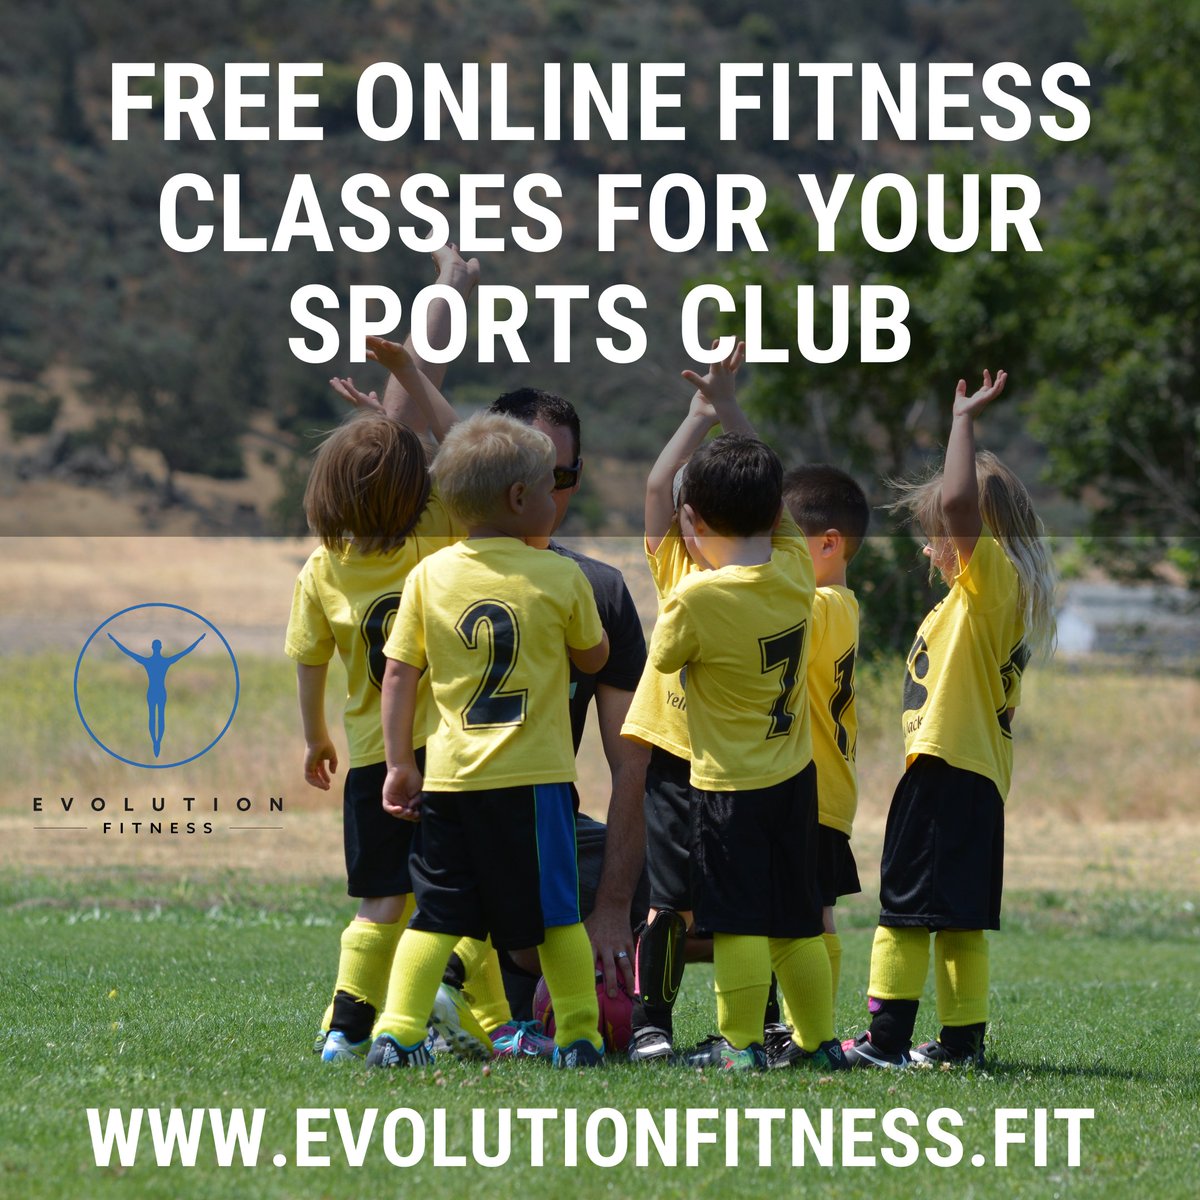 Calling all #sports #clubs 

We are offering #free #onlineclasses for your #dance #rugby #football or any sports club!

Get in touch to book your free #zoom #fitness #class

#evolutionfitness #freekidsclasses #freeonlineclasses #onlinekidsclasses #onlinefitnessclasses #kidsfit